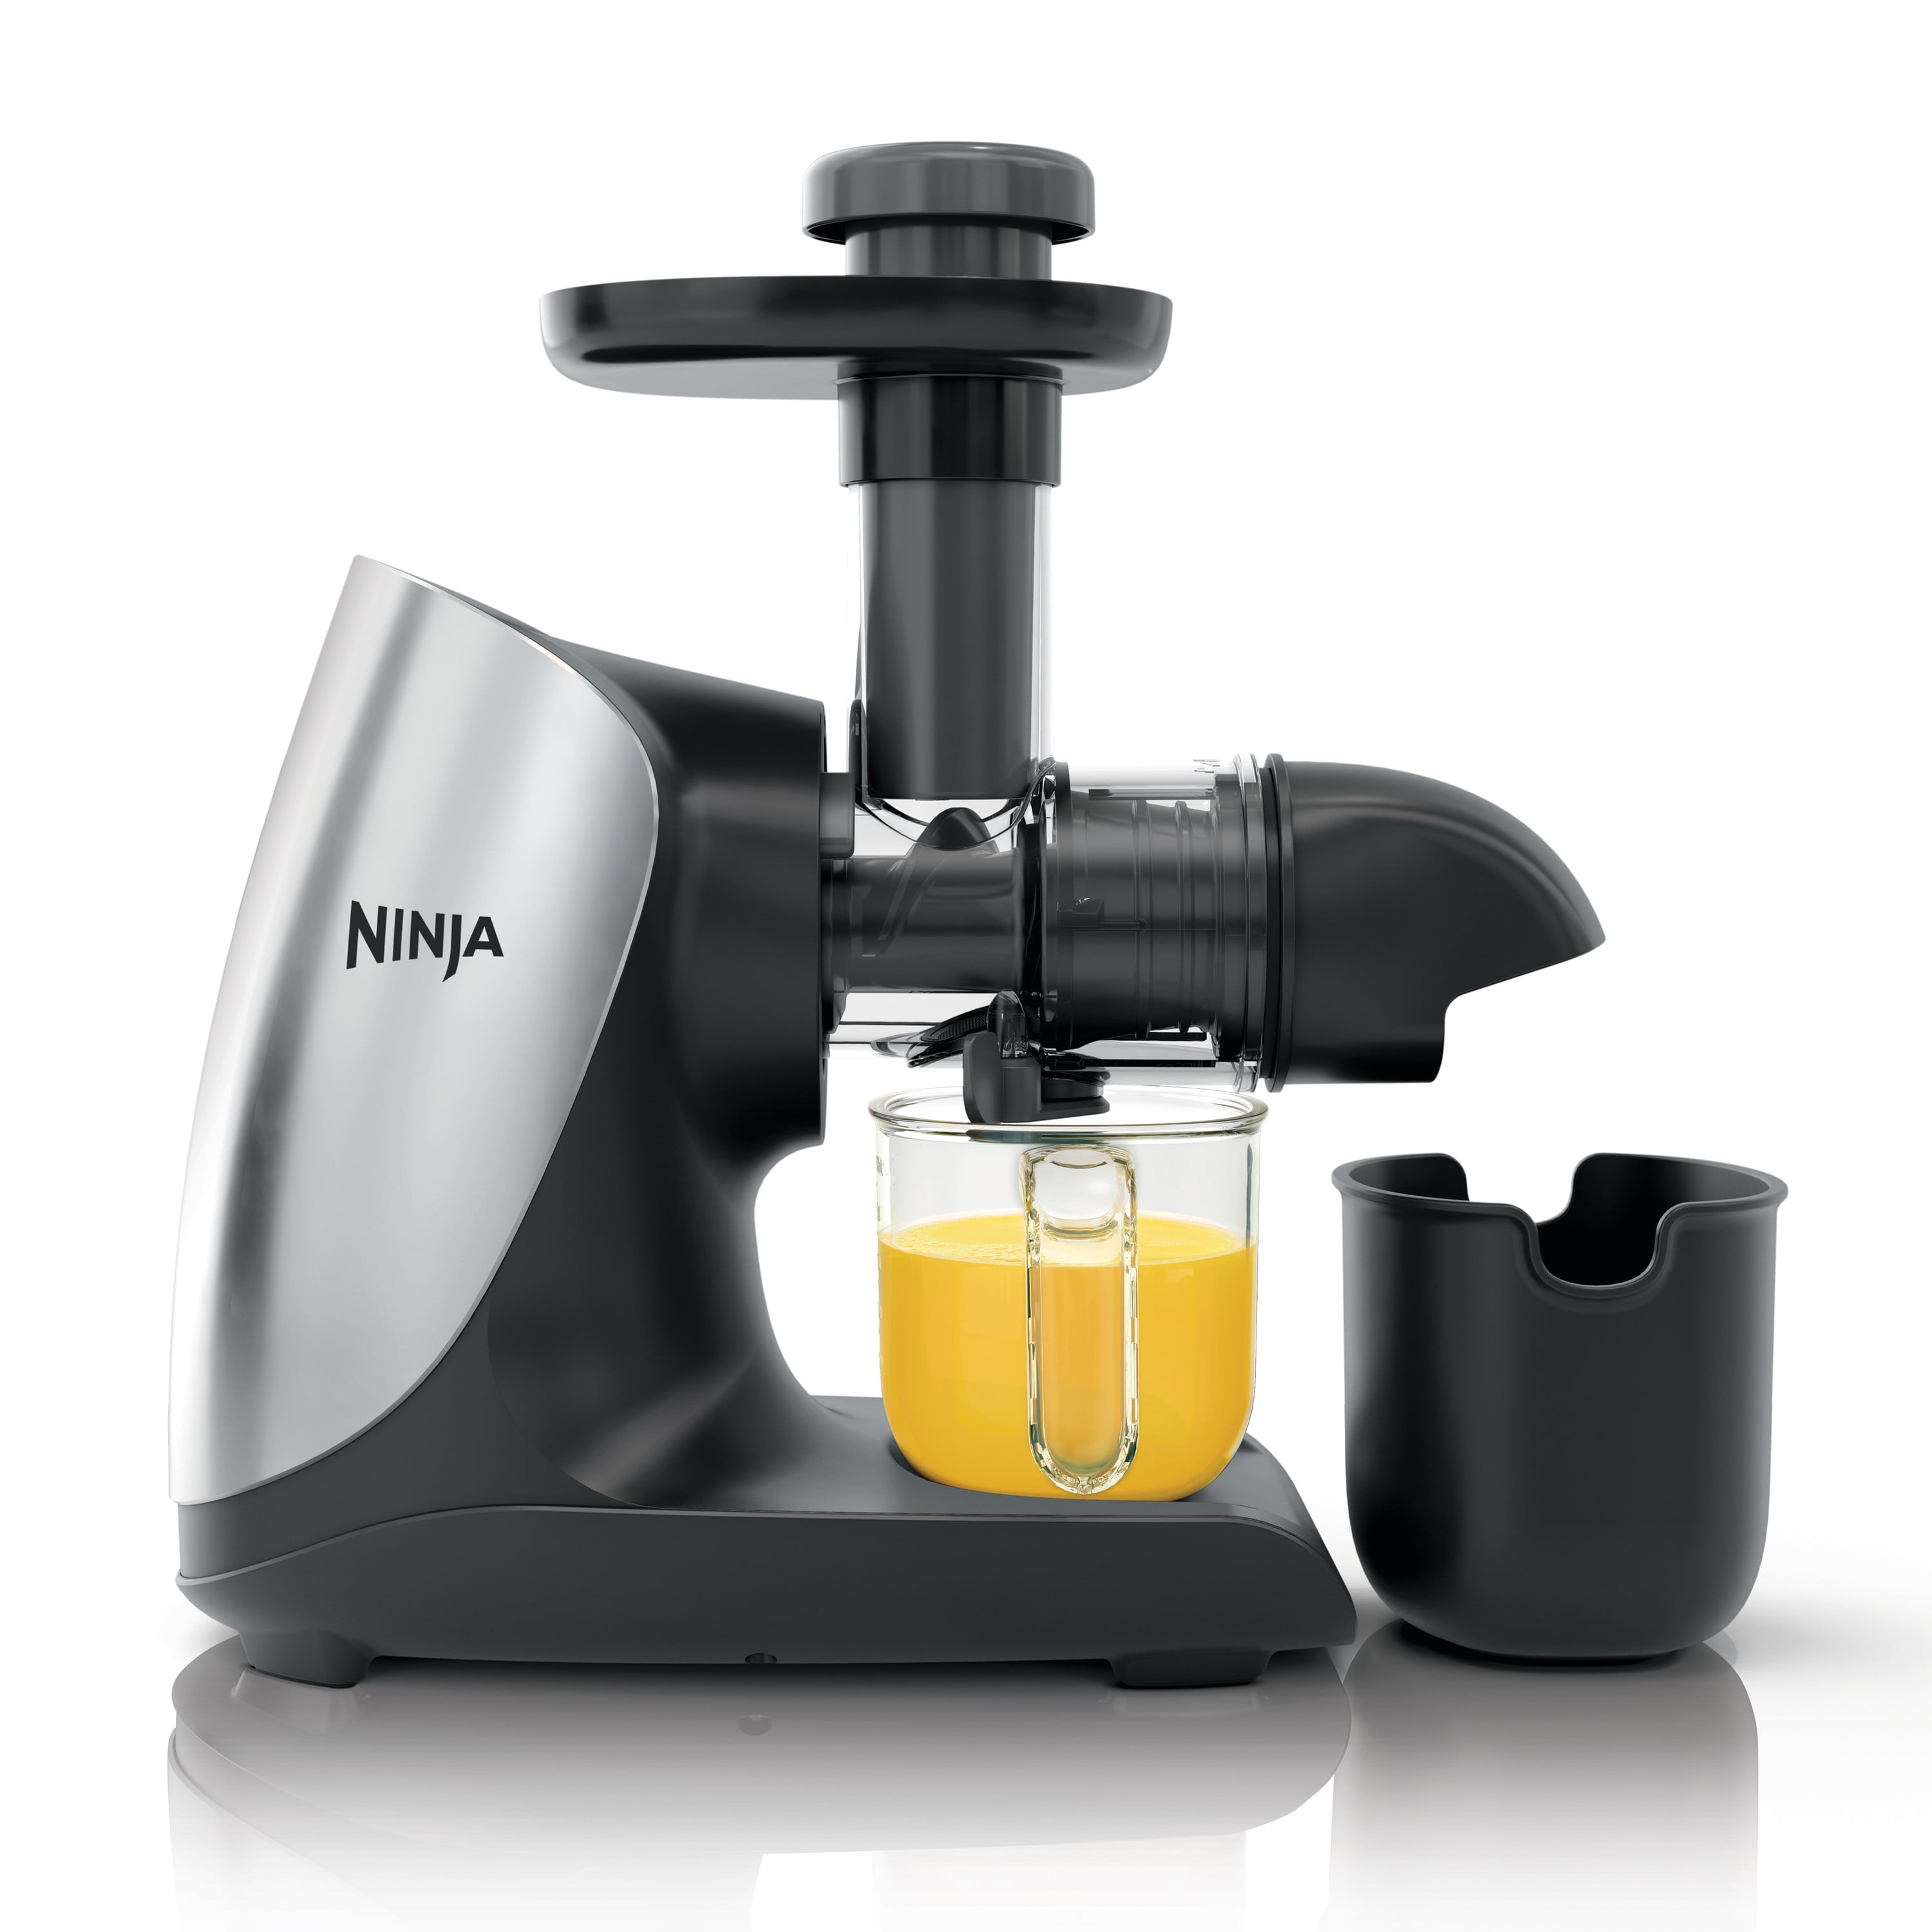 Ninja Cold Press Juicer Pro - Powerful Slow Juicer with Total Pulp Control - Cloud Silver, JC100